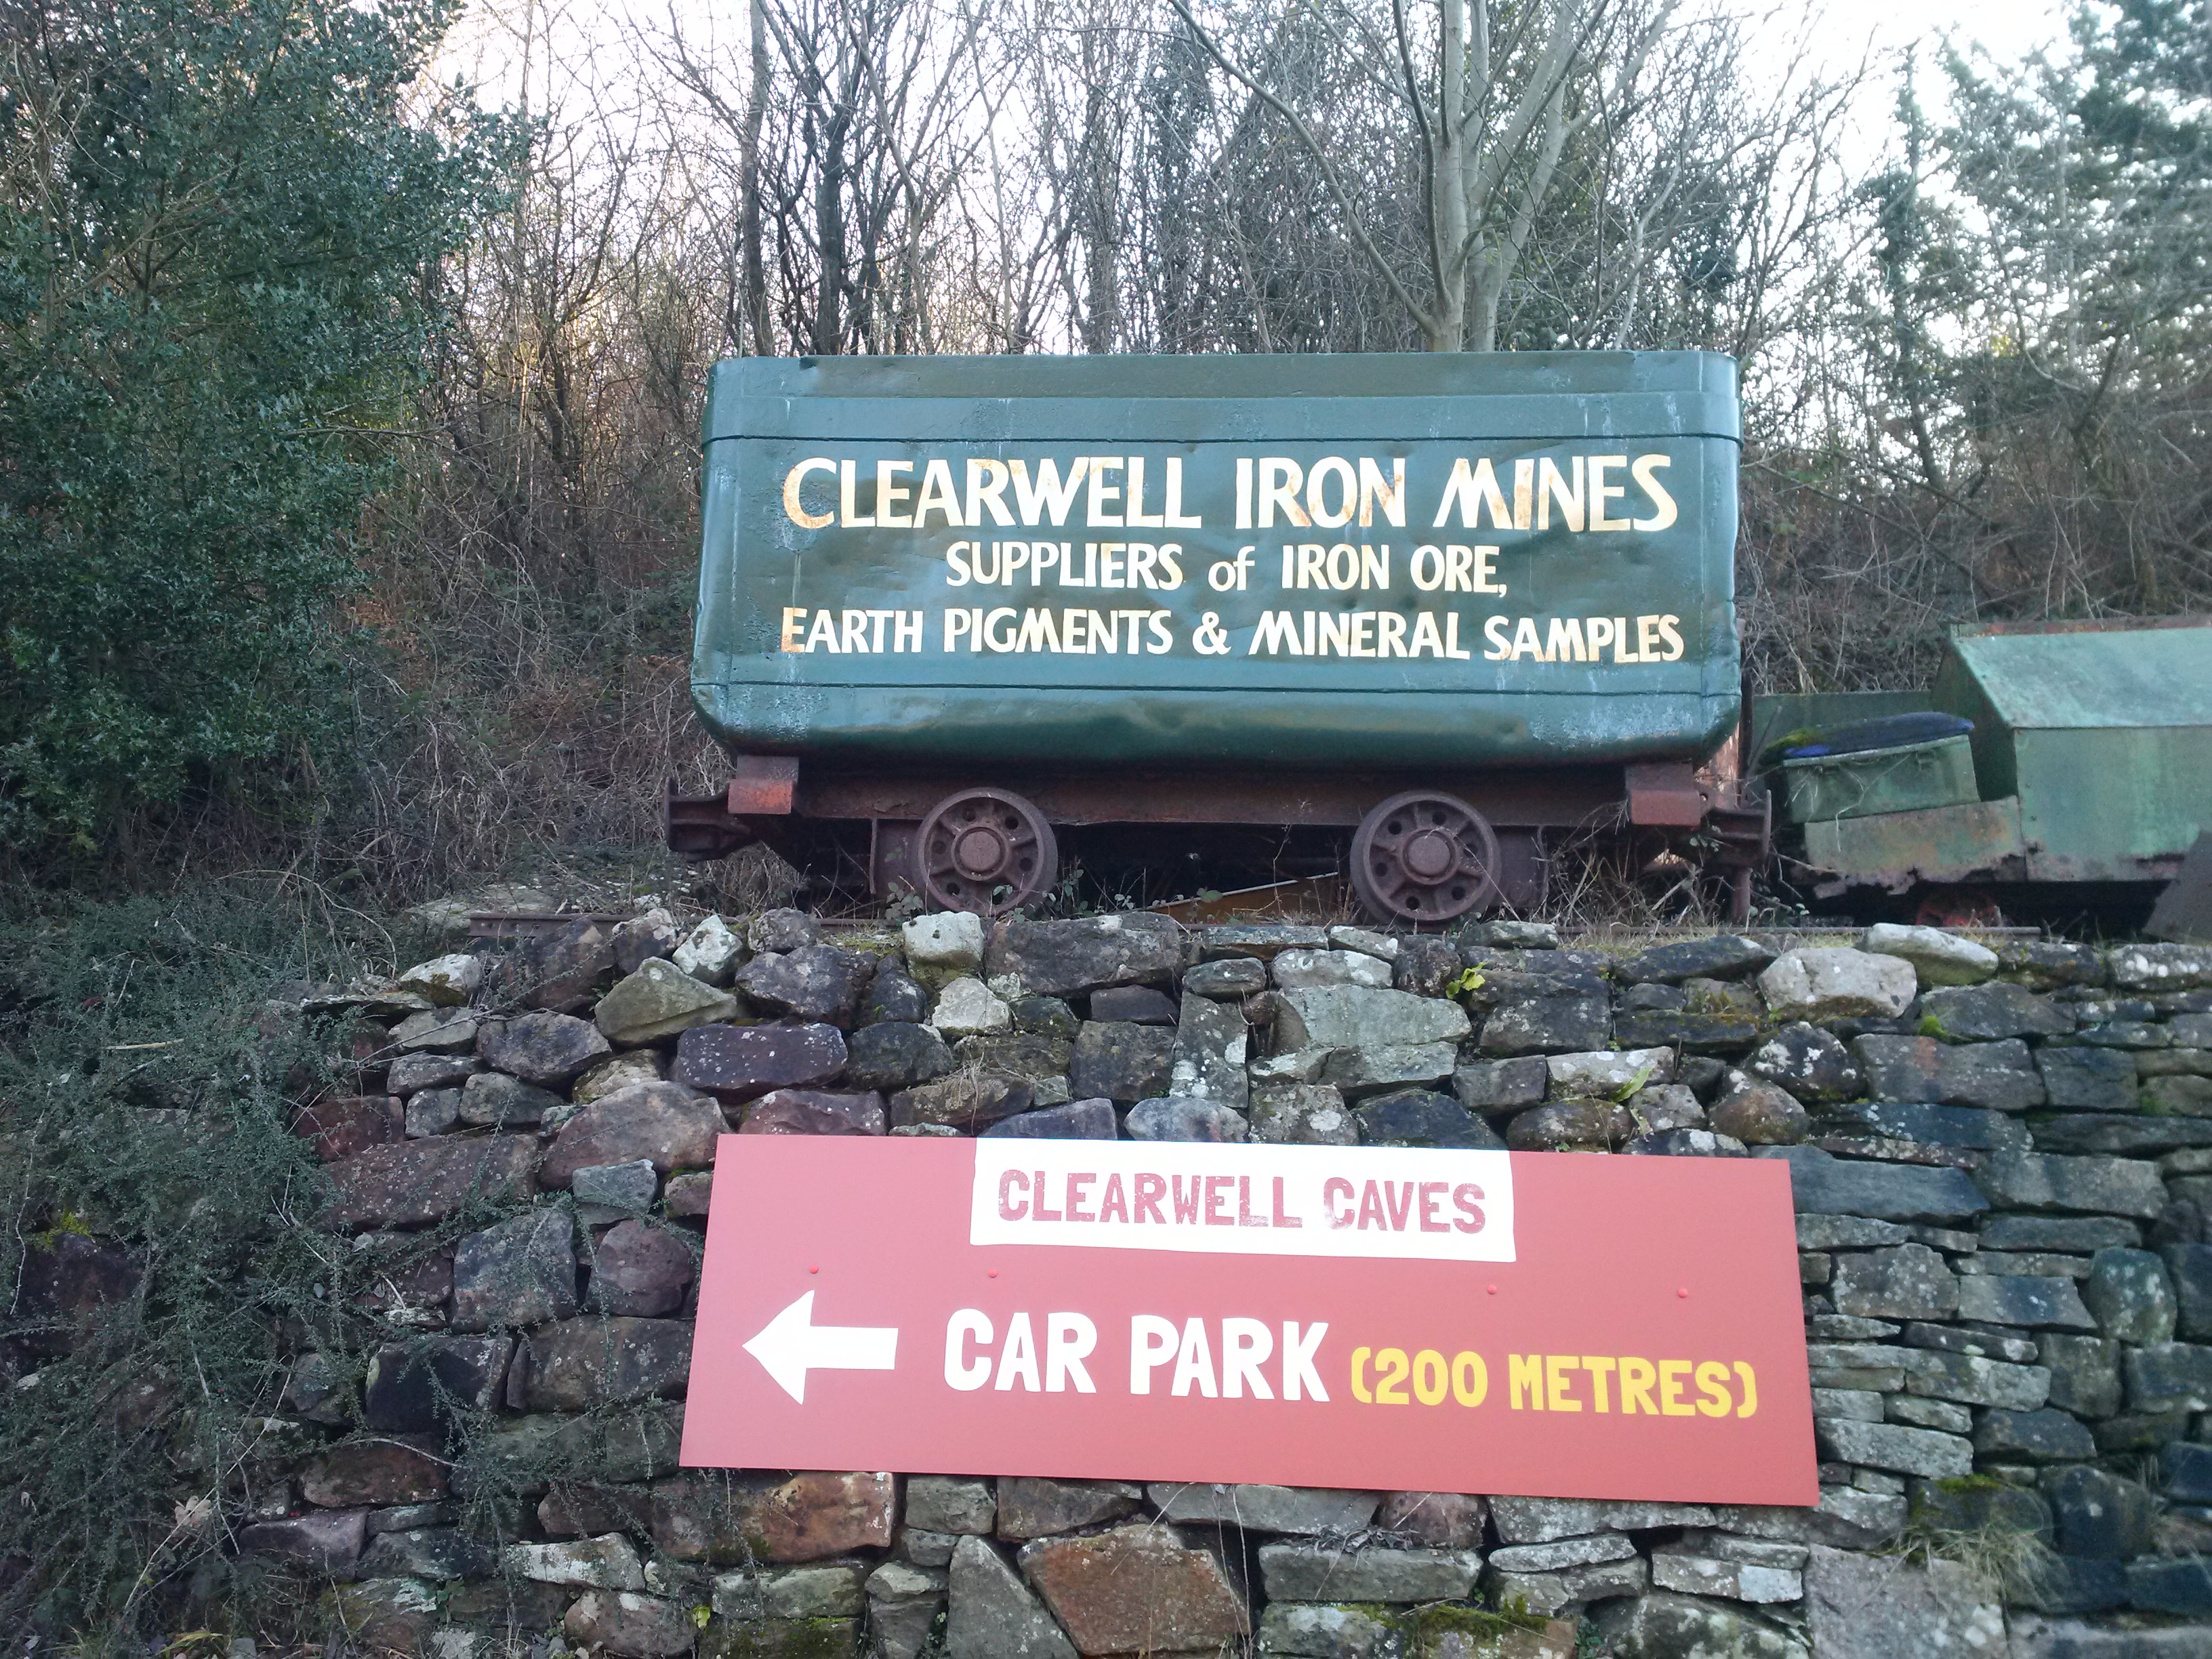 Clearwell Caves wagon, NCB type